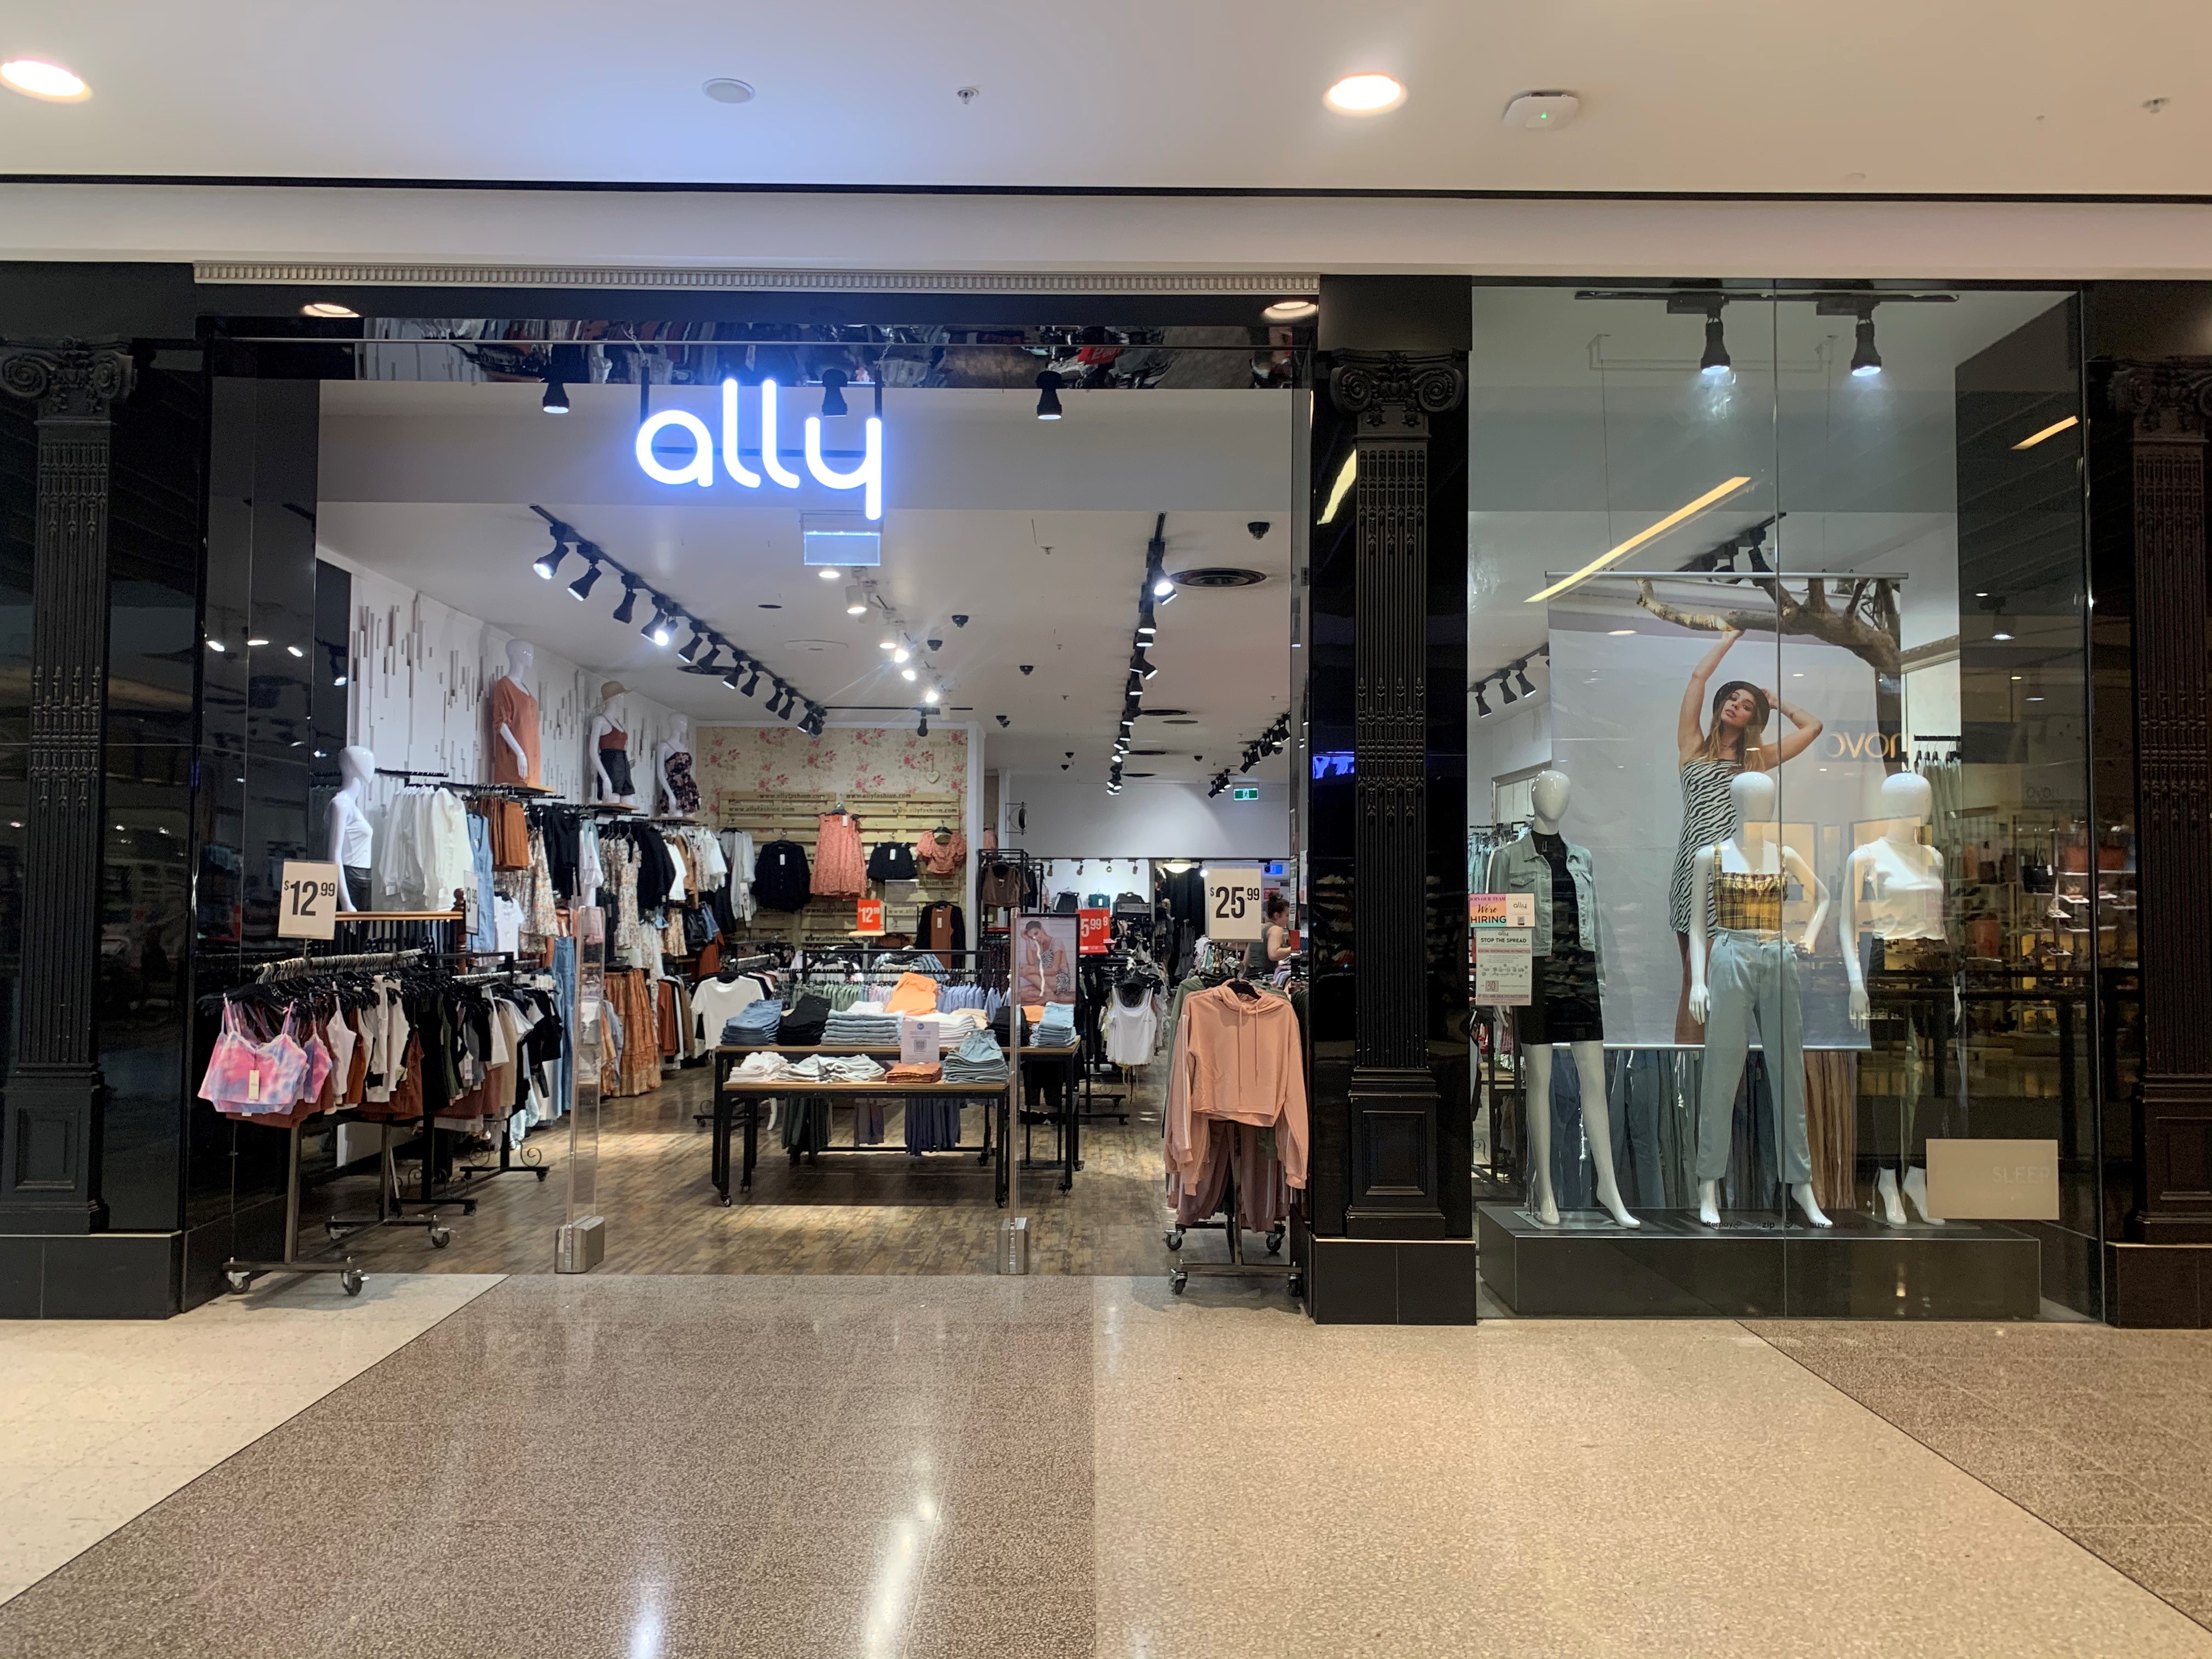 https://www.stockland.com.au/~/media/shopping-centre/stockland-shellharbour/stores/ally-fashion/251-shellharbour.jpg